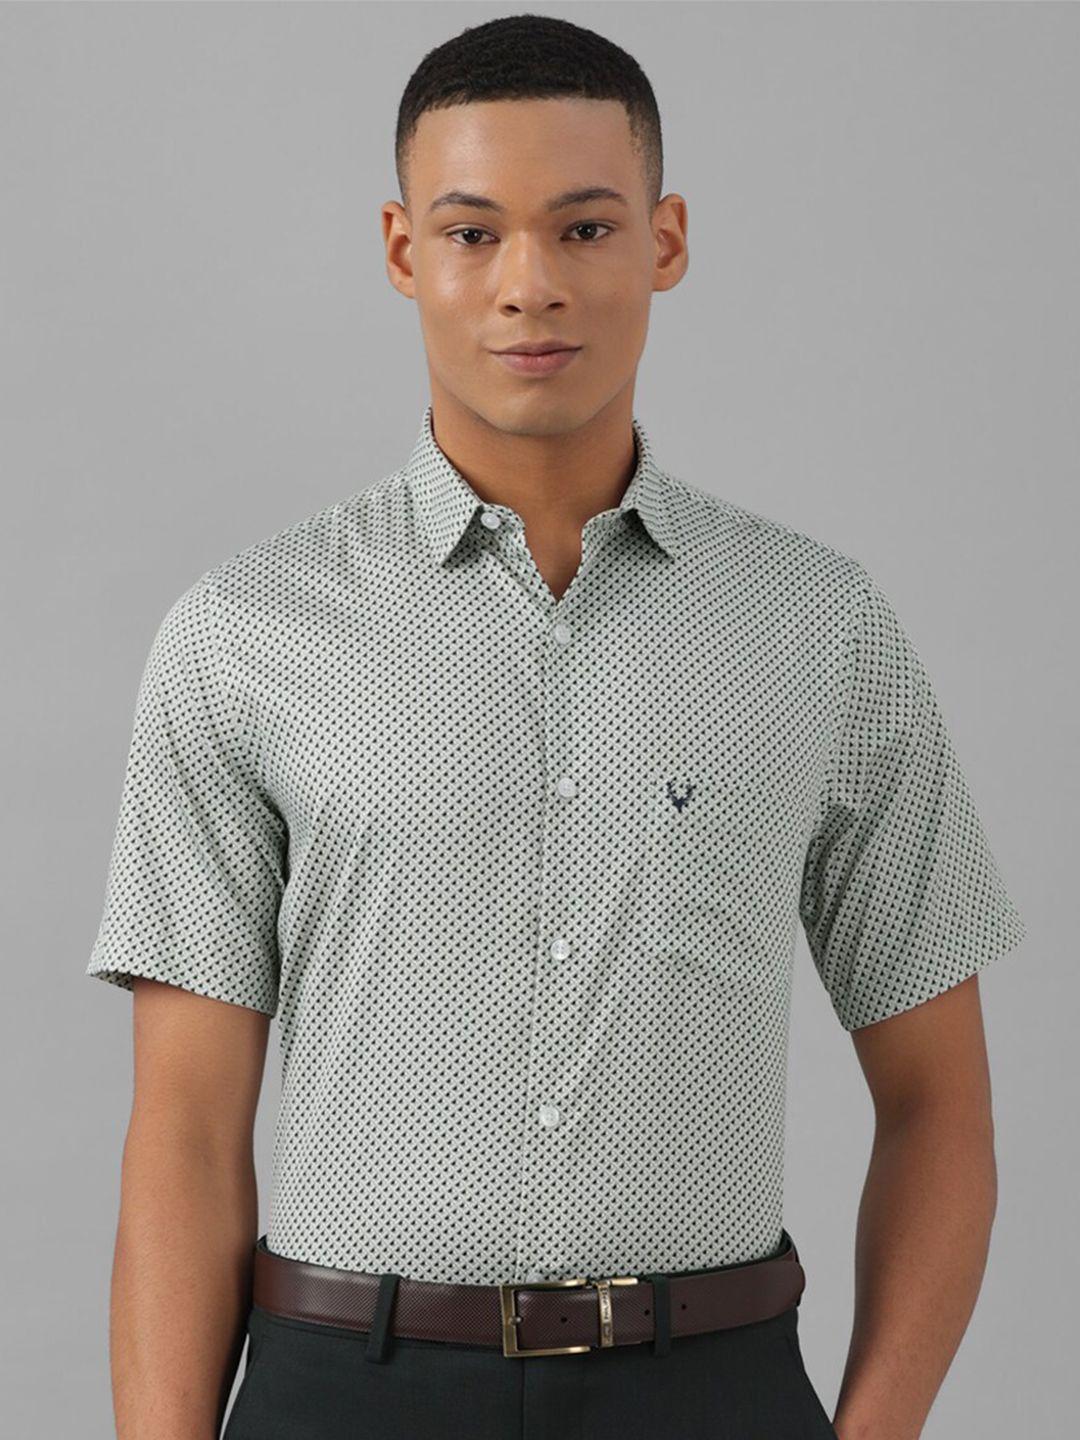 allen solly slim fit opaque geometric printed pure cotton formal shirt